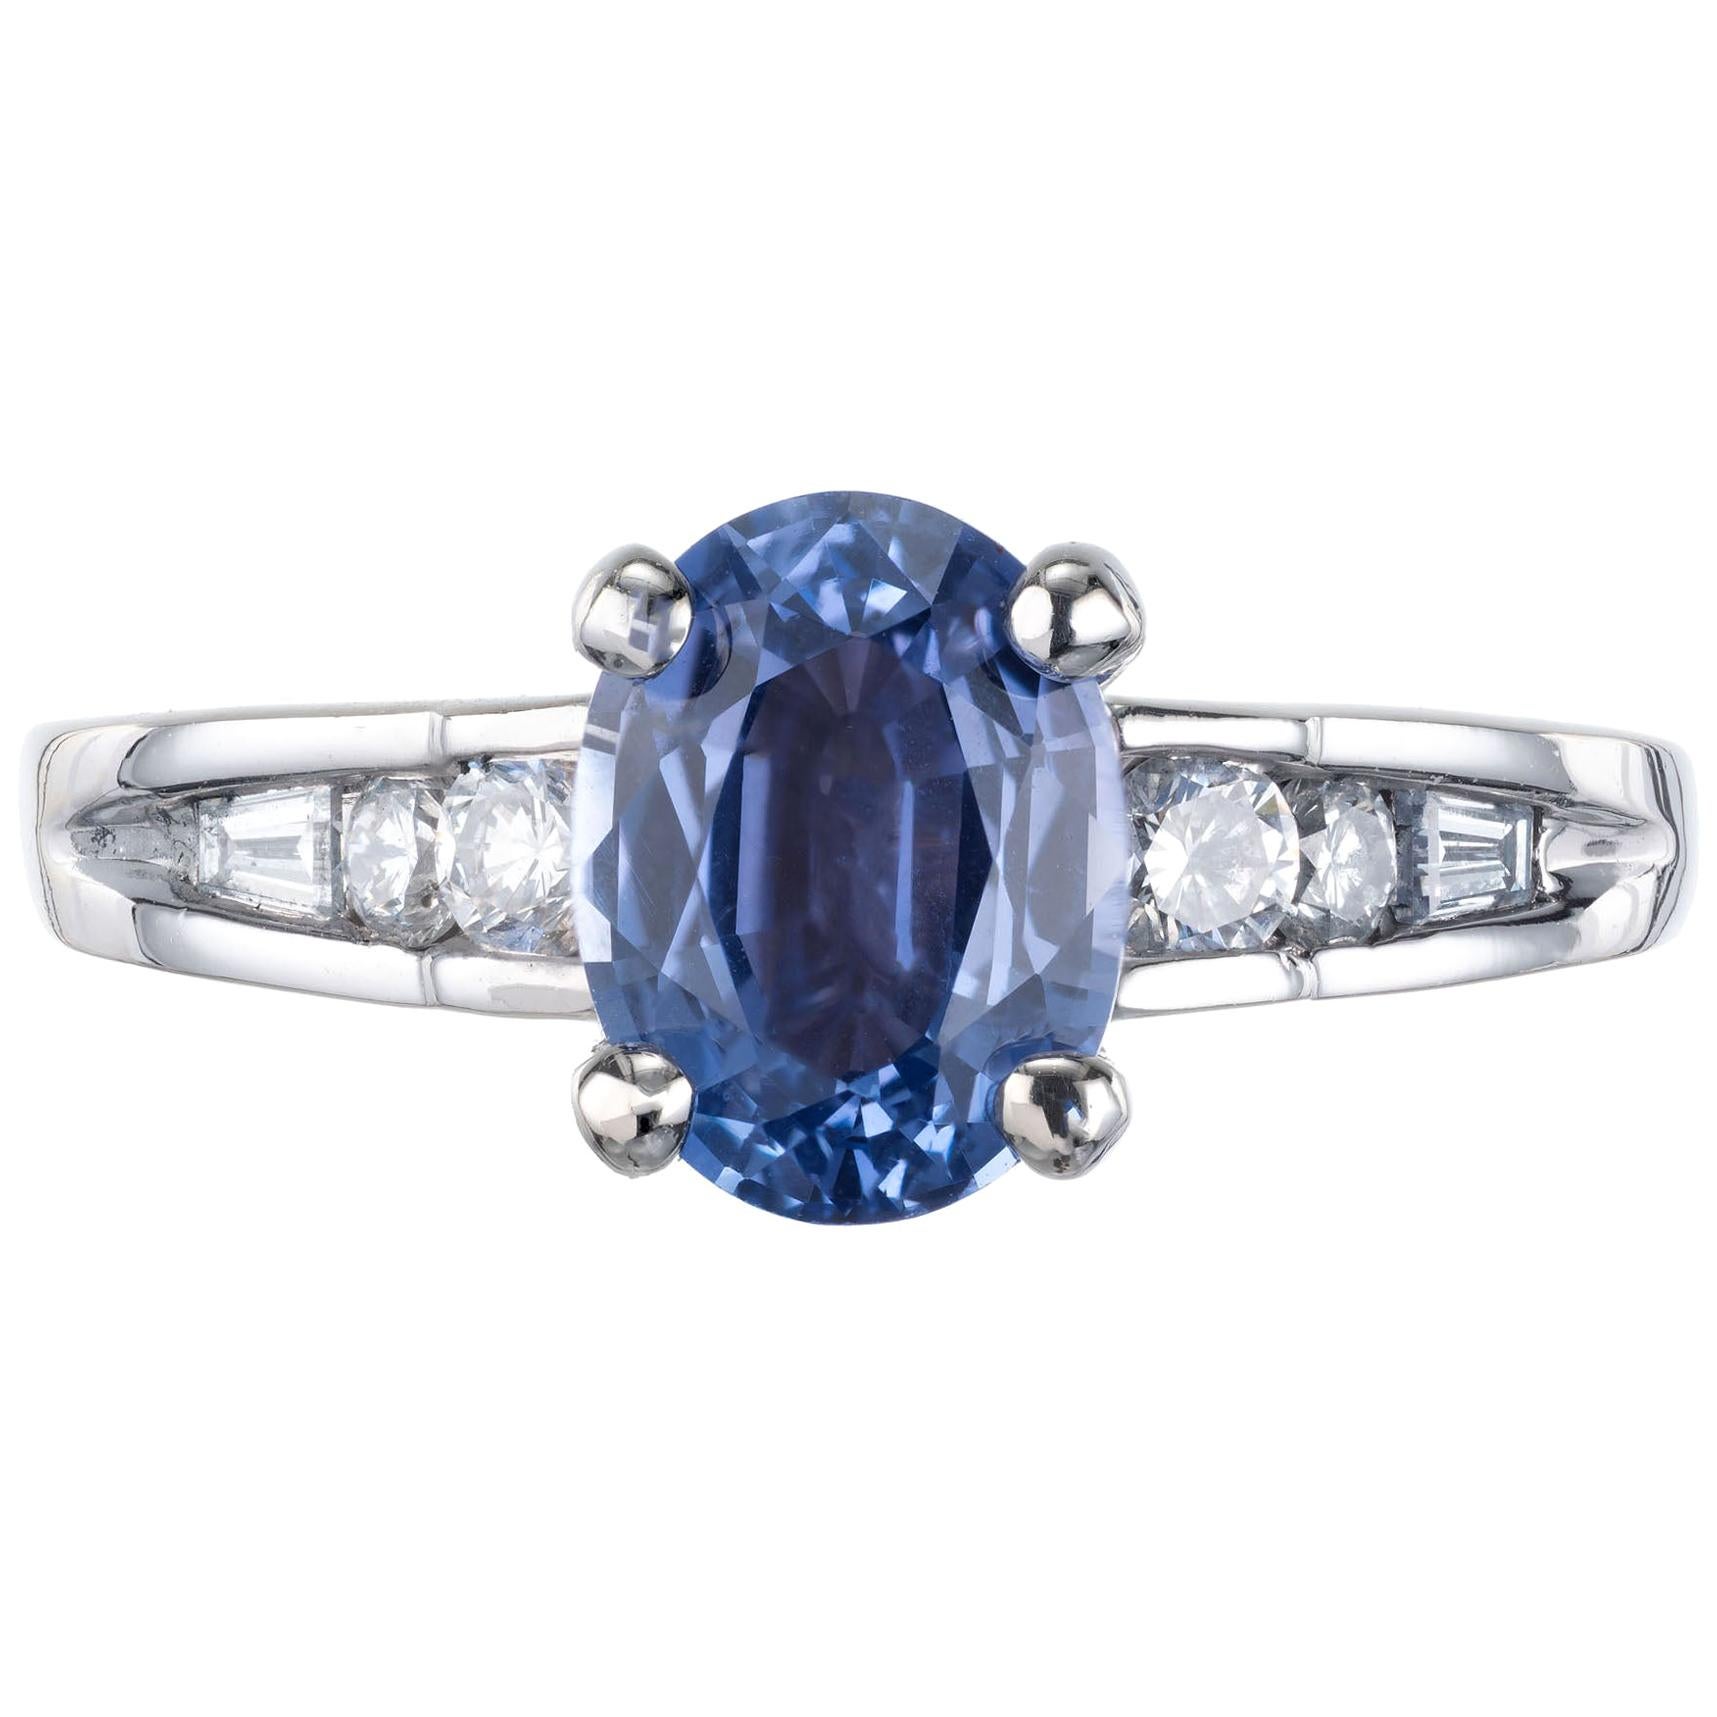 GIA Certified 1.71 Carat Blue Sapphire Diamond White Gold Engagement Ring